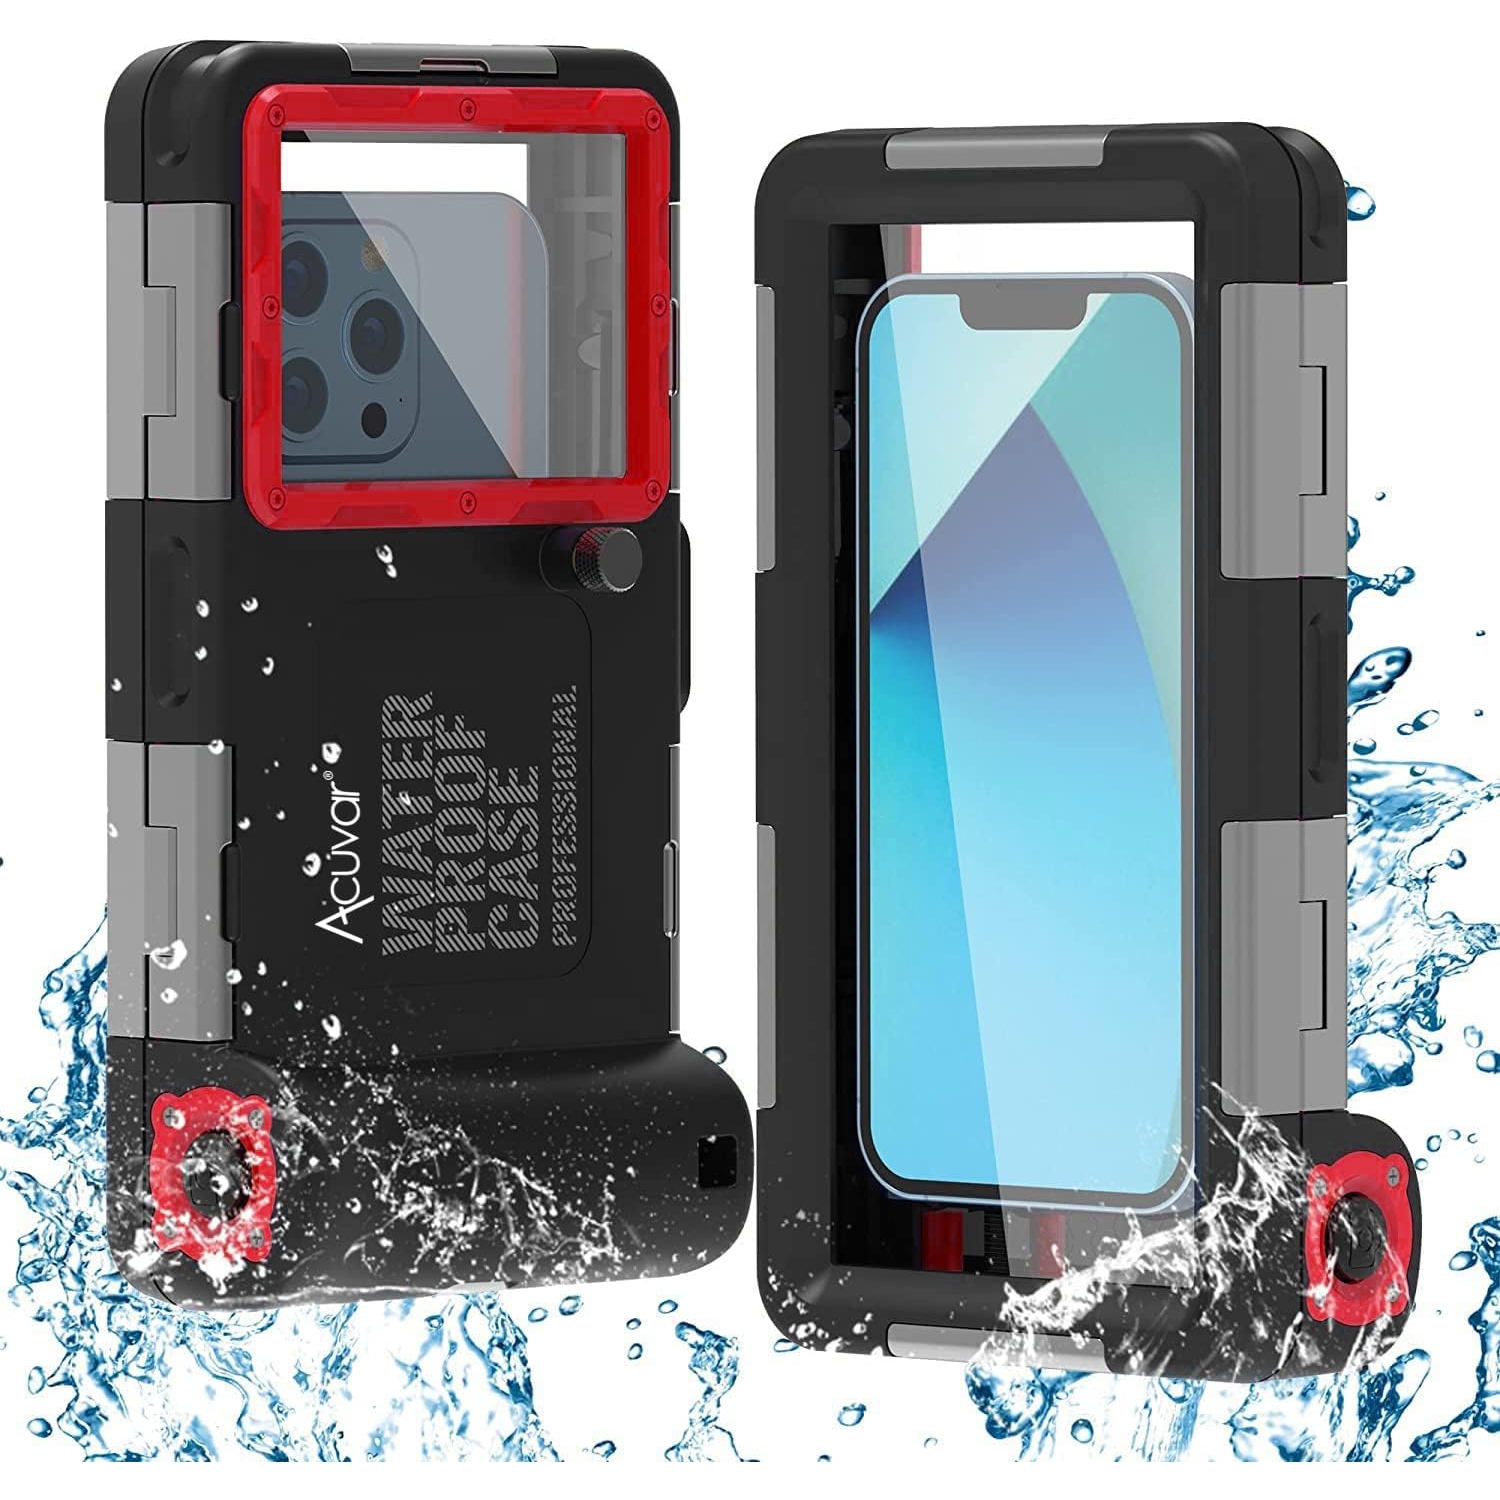 New Updated Extreme Waterproof Underwater Diving, Snorkel Phone Case Compatible with All iPhone (Max, Plus, S),